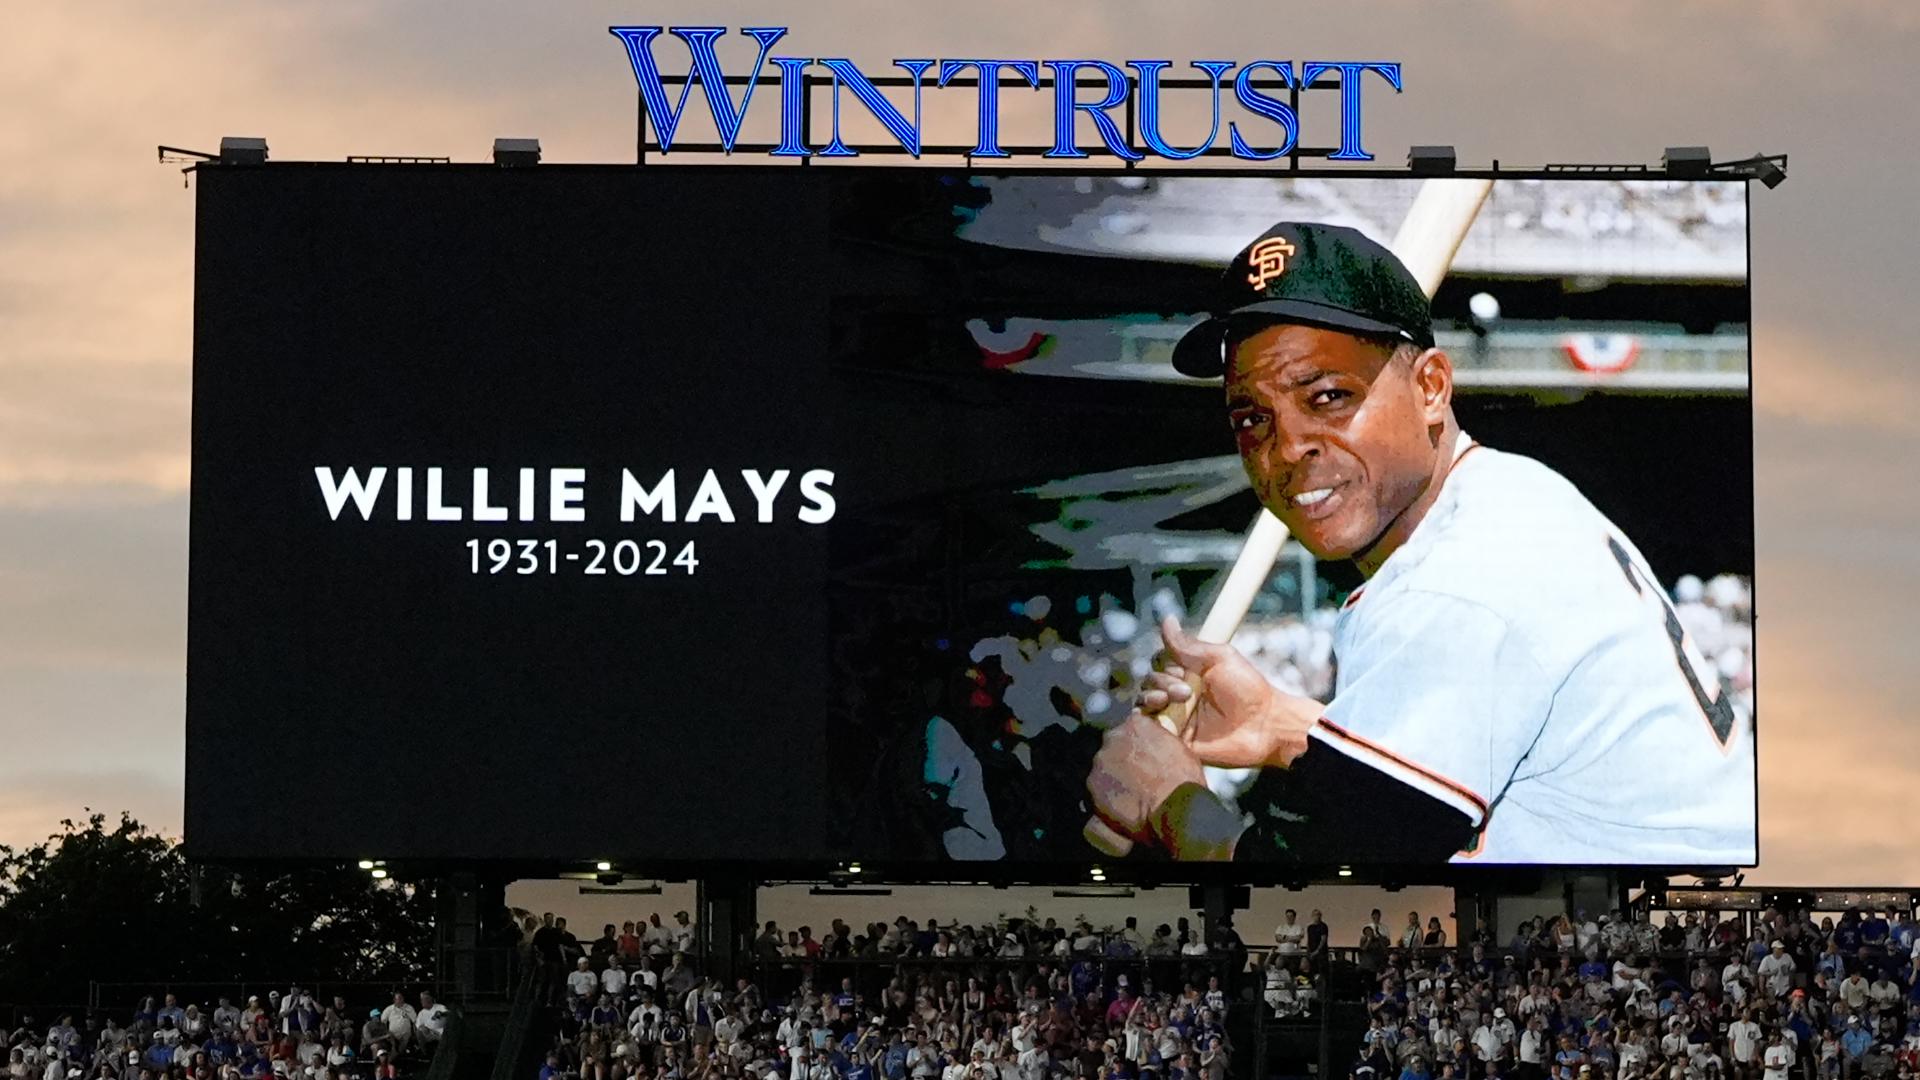 Willie Mays, the 'Say Hey Kid' and San Francisco Giants legend, has died at 93.